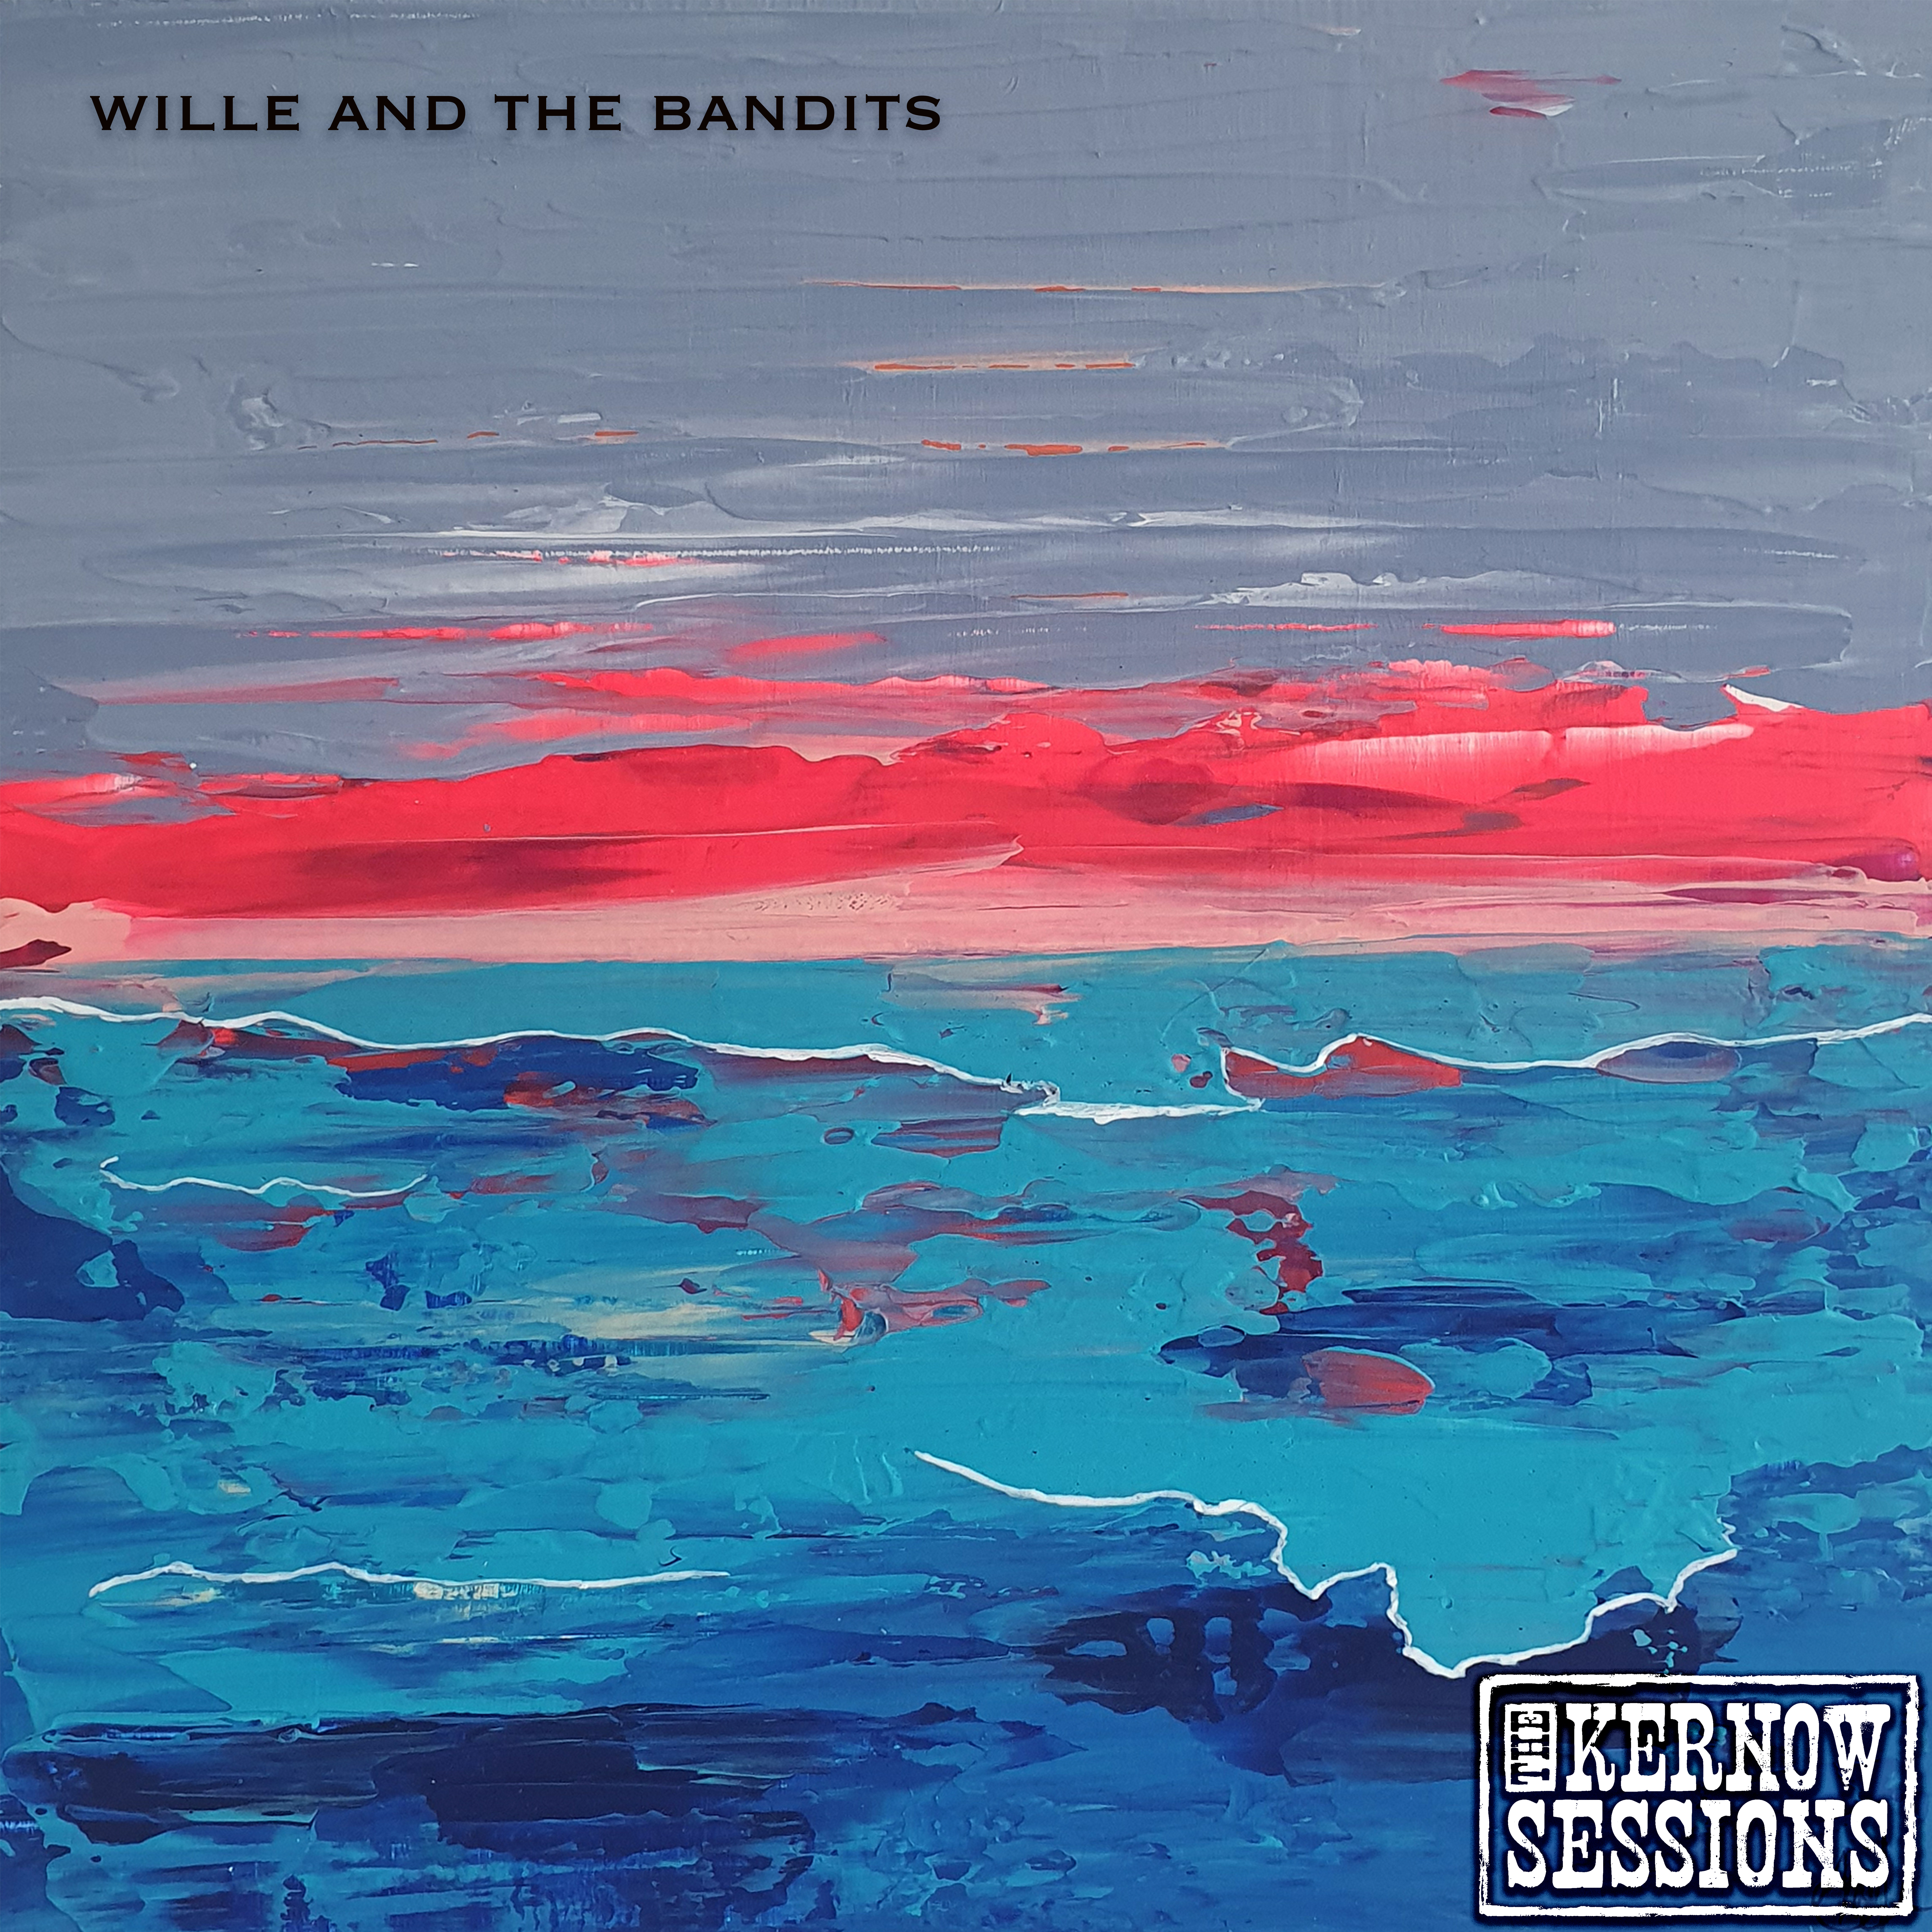 Kernow Sessions CD | Live Album - Wille and the Bandits